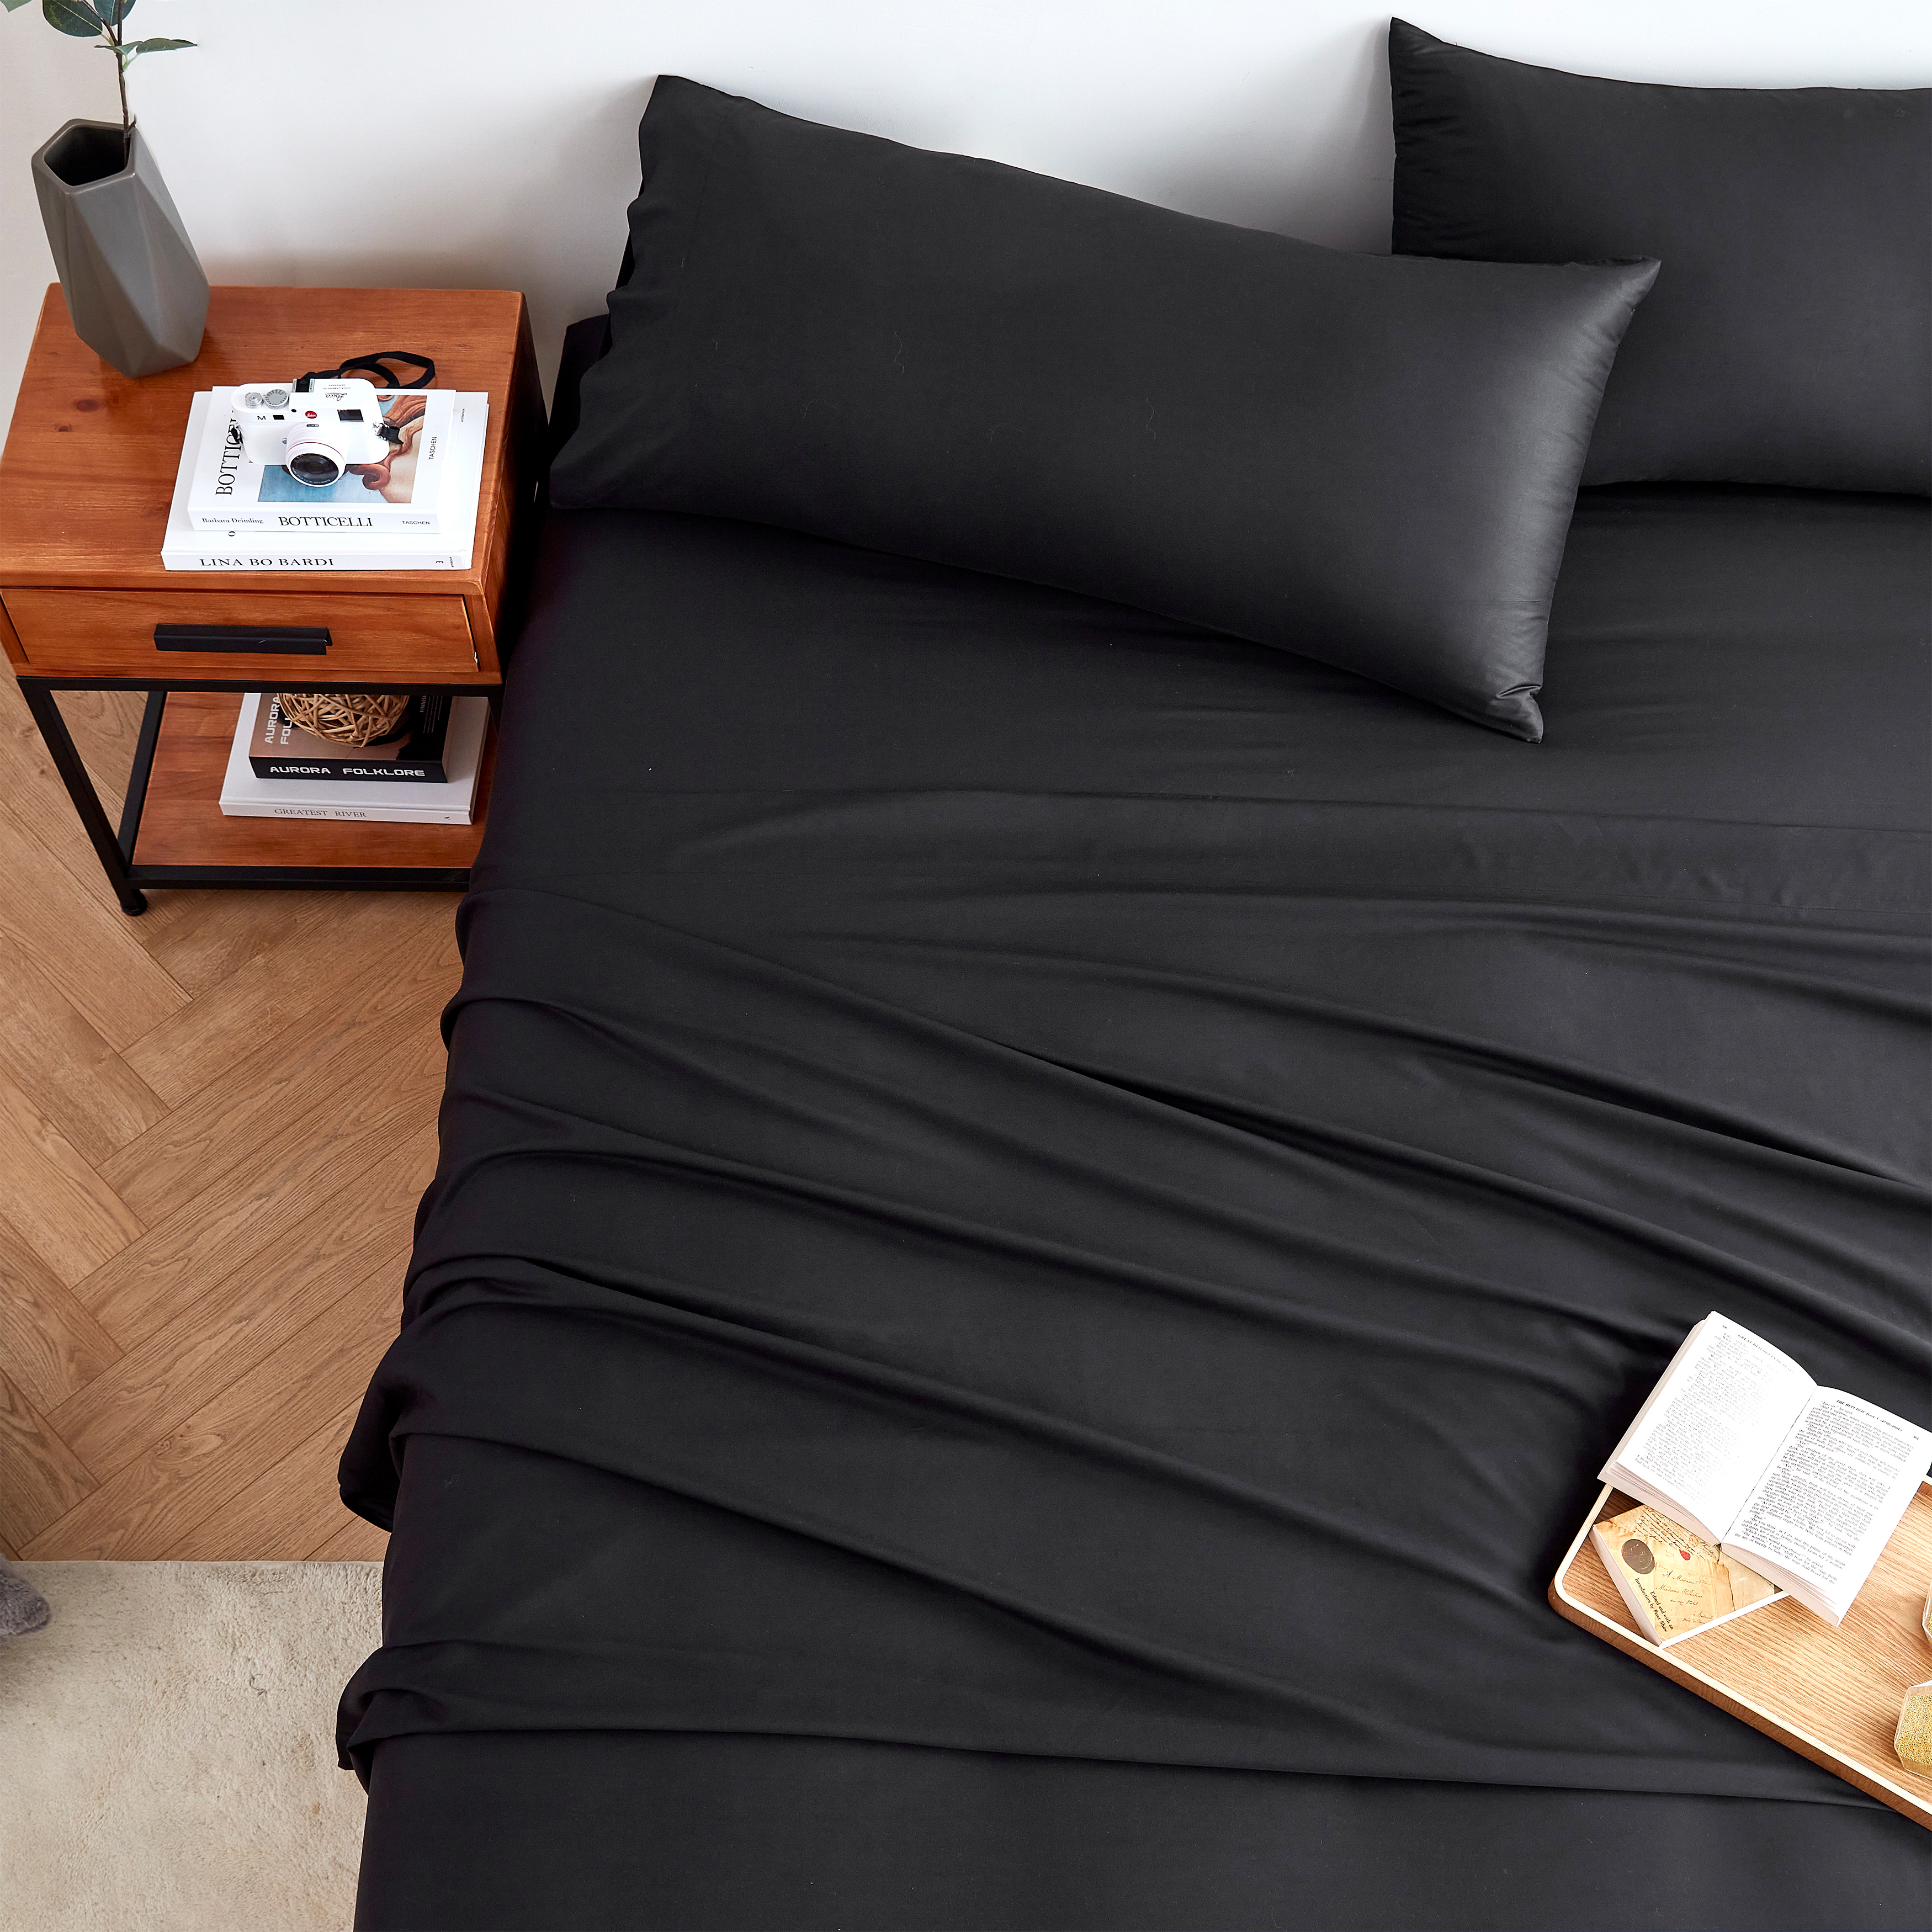 Neutral Bedding Essentials for Easy to Match Bedroom Decor